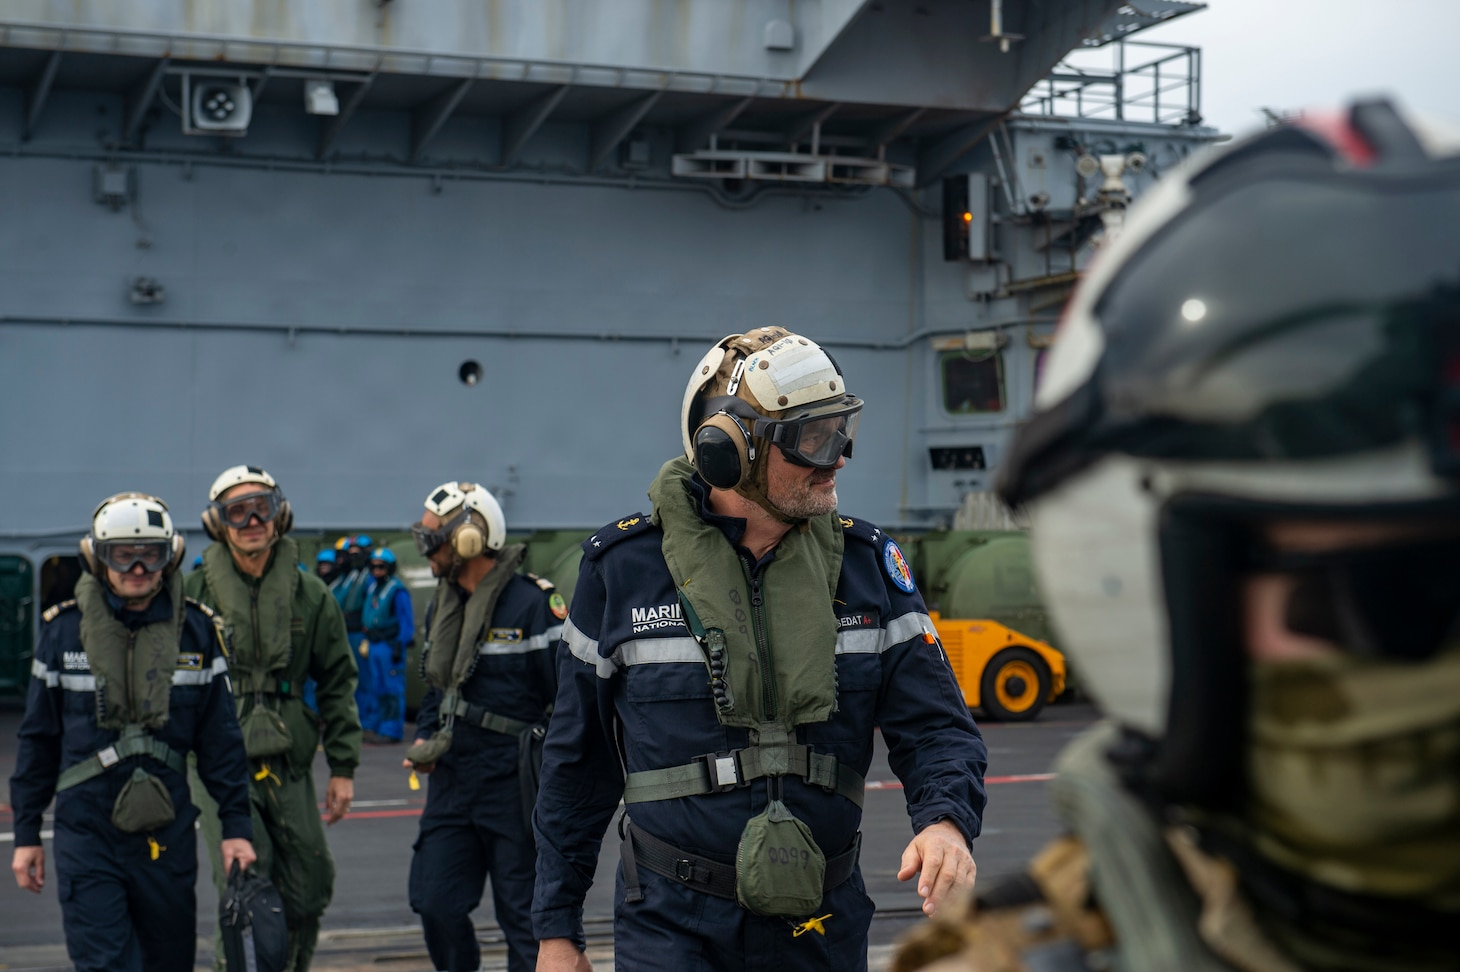 Rear-Admiral Marc Aussedat, commander, French Marine Nationale, walks across the flight deck of the French aircraft carrier FS Charles de Gaulle (R91) during an integrated operations exercise with aircraft carrier USS Dwight D. Eisenhower (CVN 69). Ike is conducting operations in the Mediterranean Sea as part of the USS Dwight D. Eisenhower Carrier Strike Group.